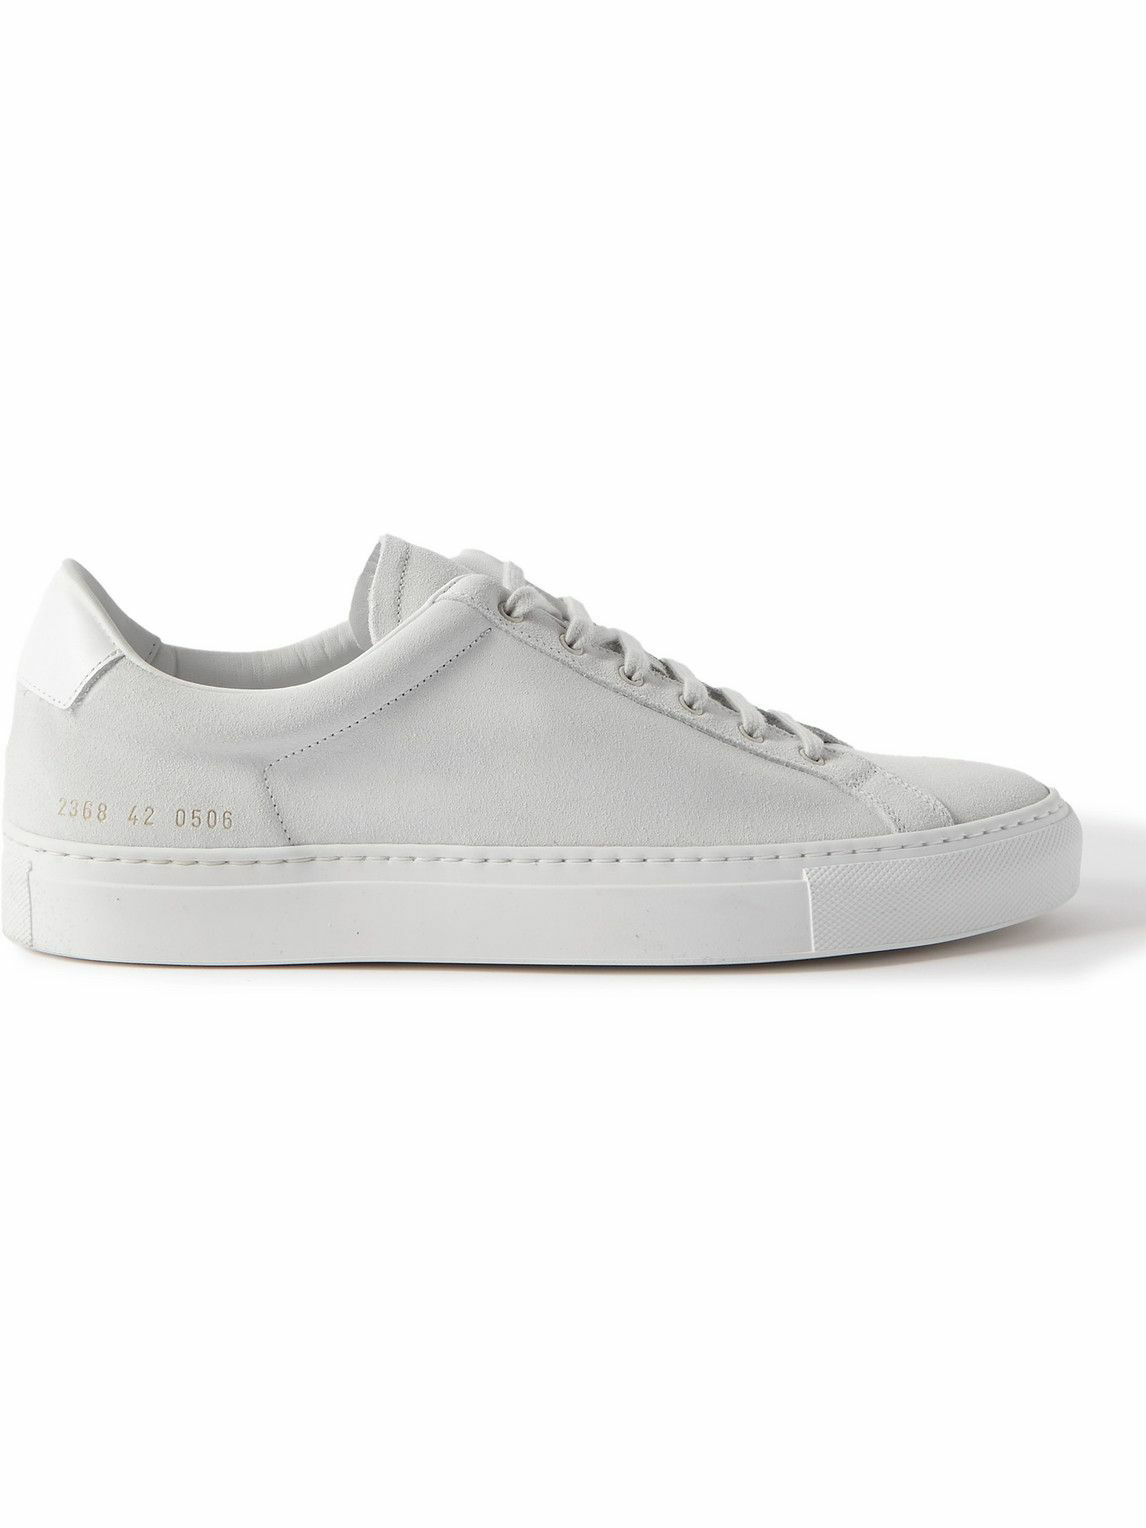 Common Projects - Retro Low Leather-Trimmed Suede Sneakers - White ...